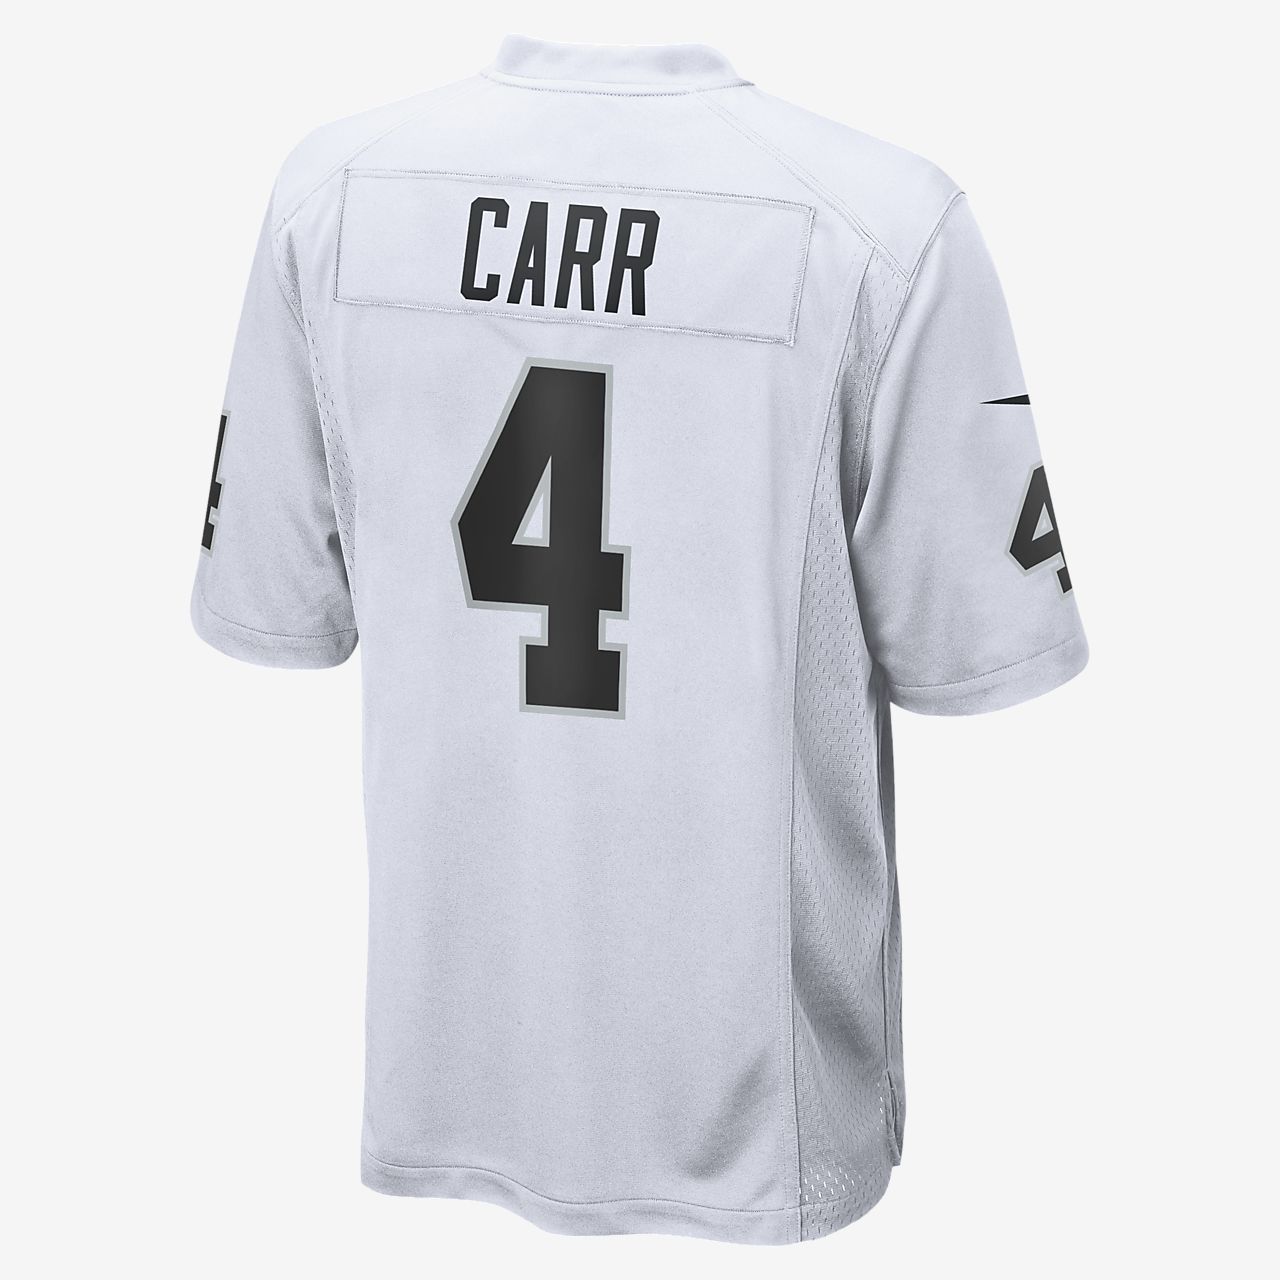 oakland raiders game jersey